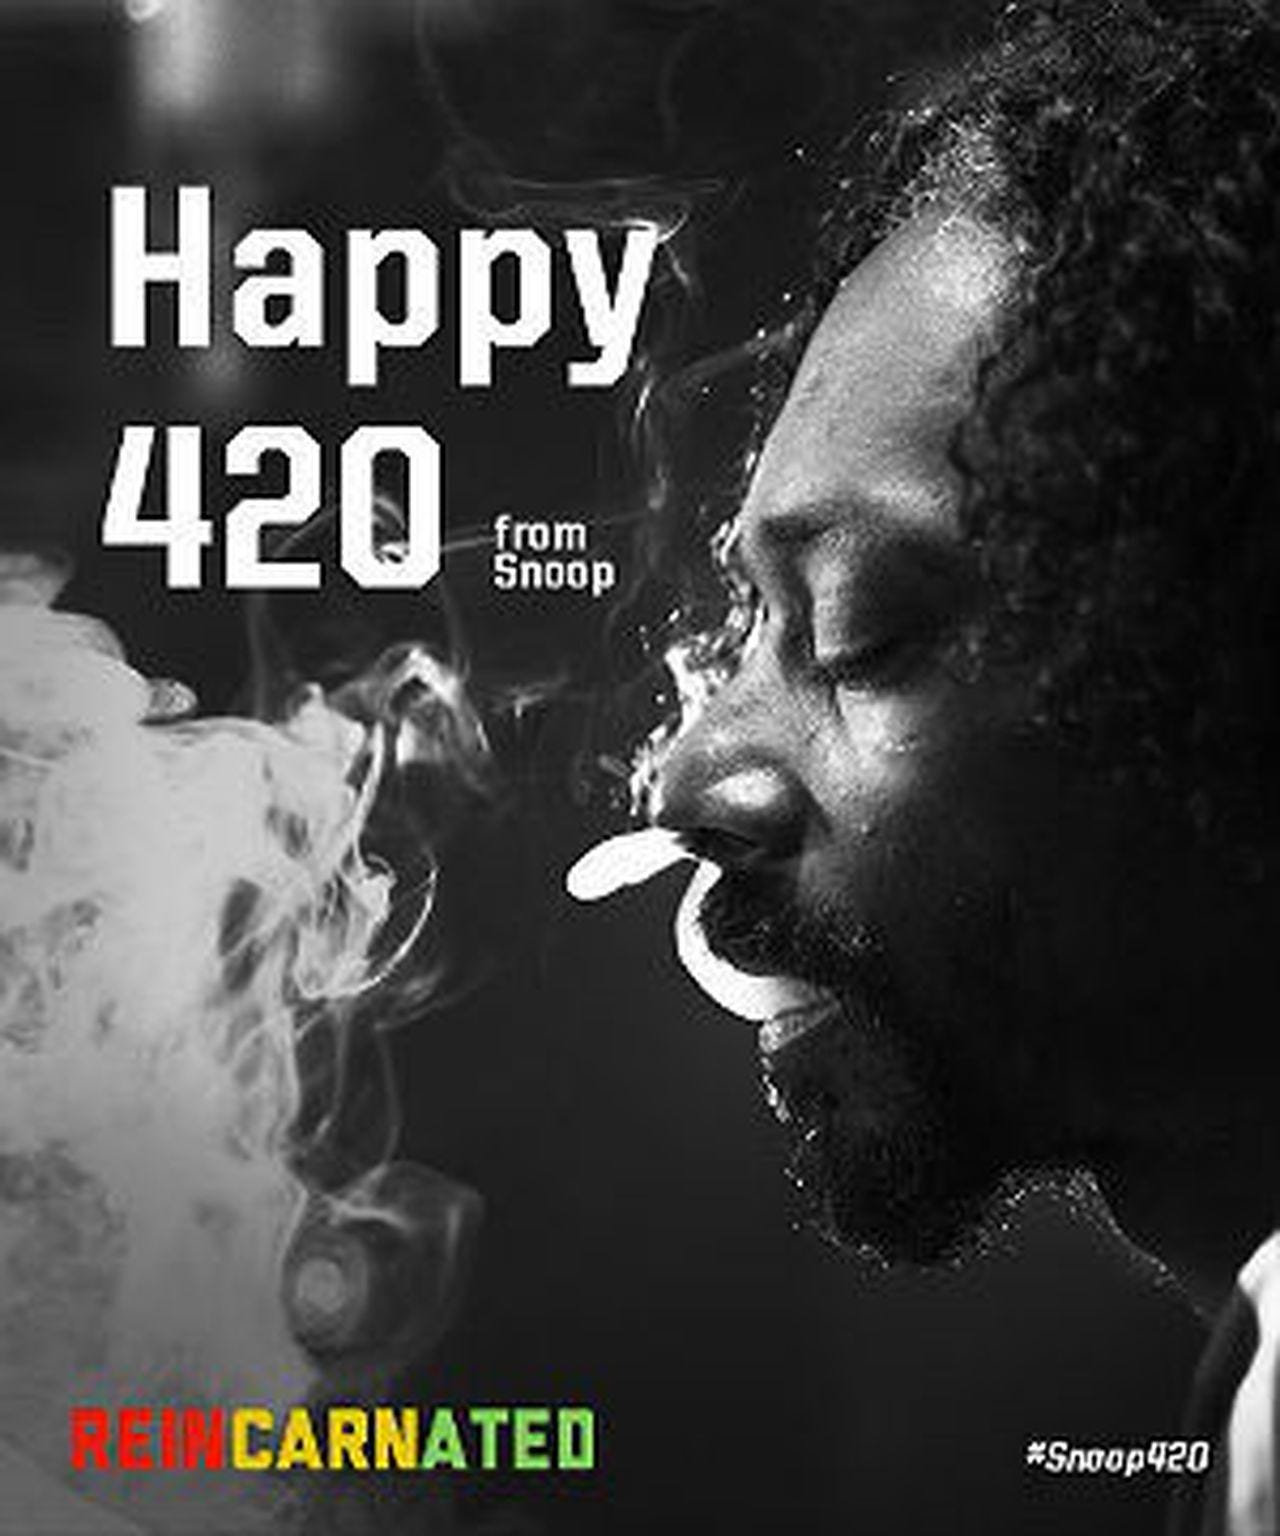 Viral Video: Snoop Dogg's 420 Day message - nj.com